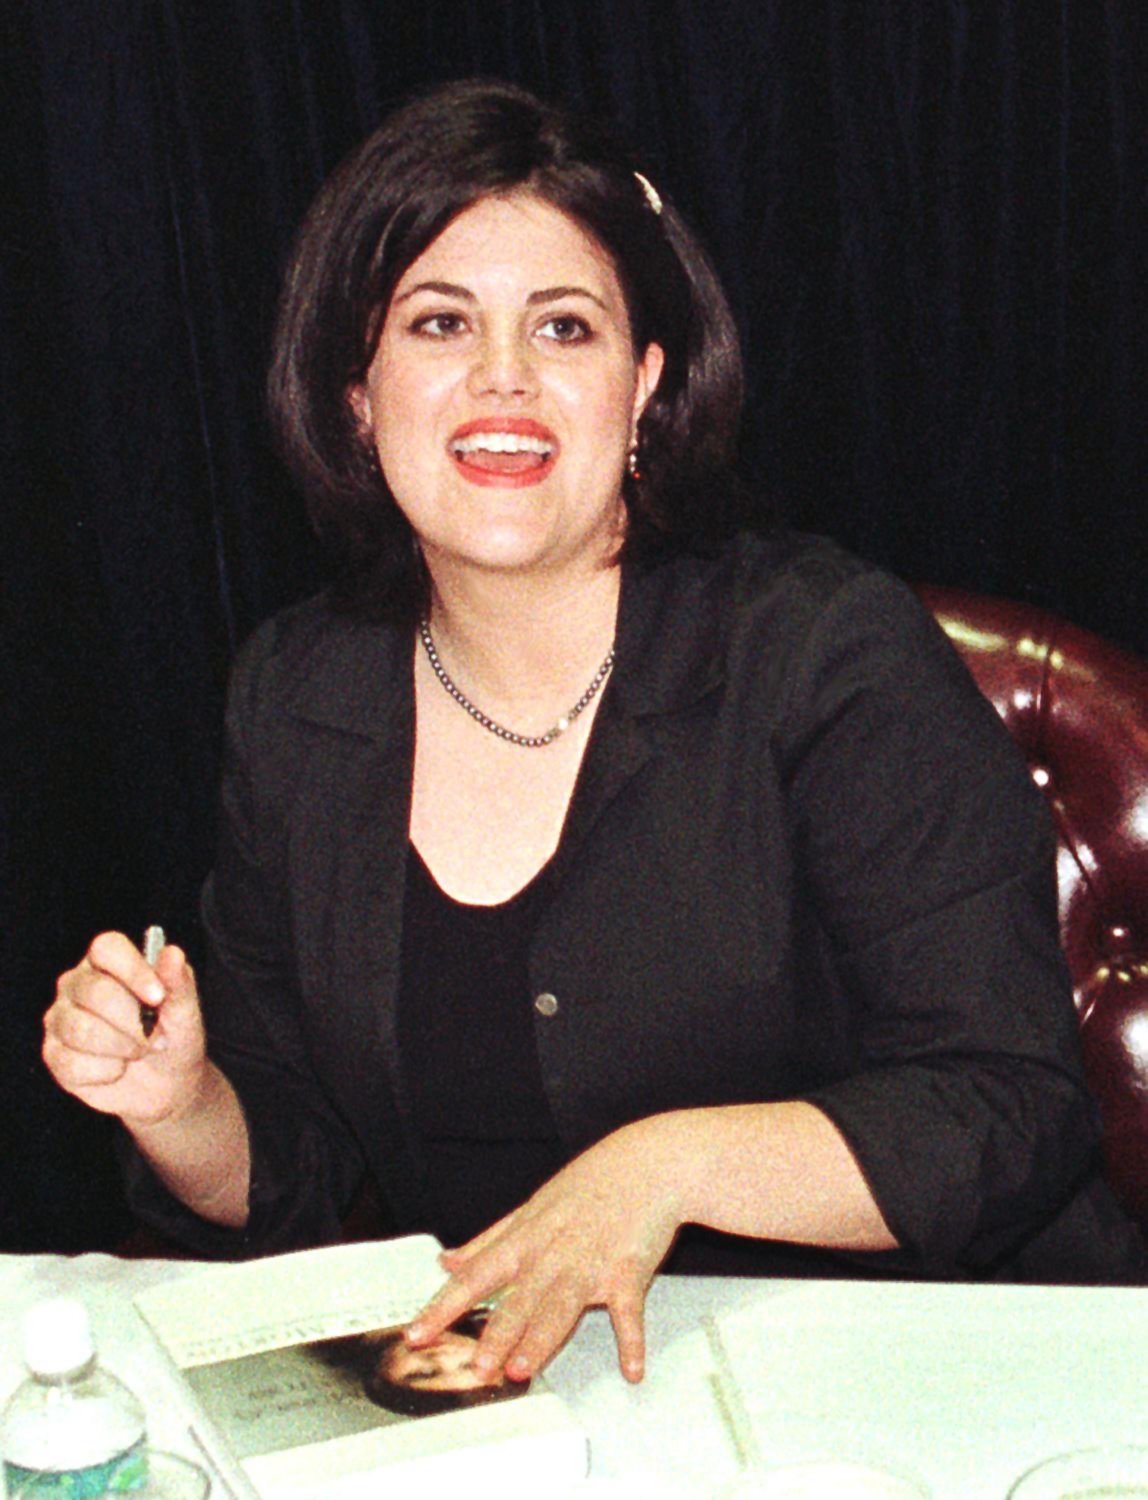 PHOTO: Monica Lewinsky looks up as she signs her book, 'Monica's story', during a signing April, 23, 1999, at a book store in Fort Lauderdale, Florida. 